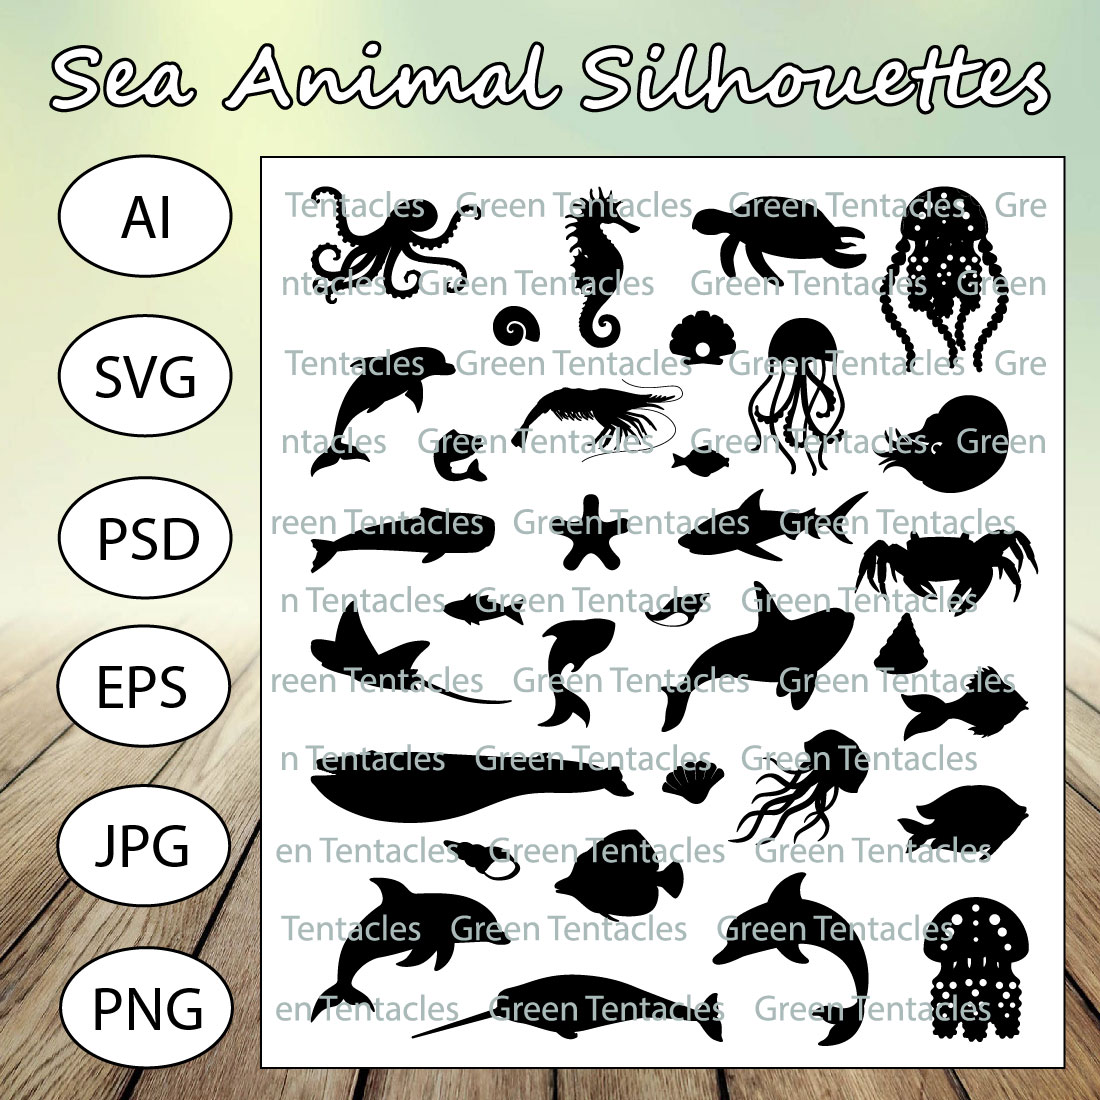 Sea Animal Silhouettes for Crafters and Designers cover image.